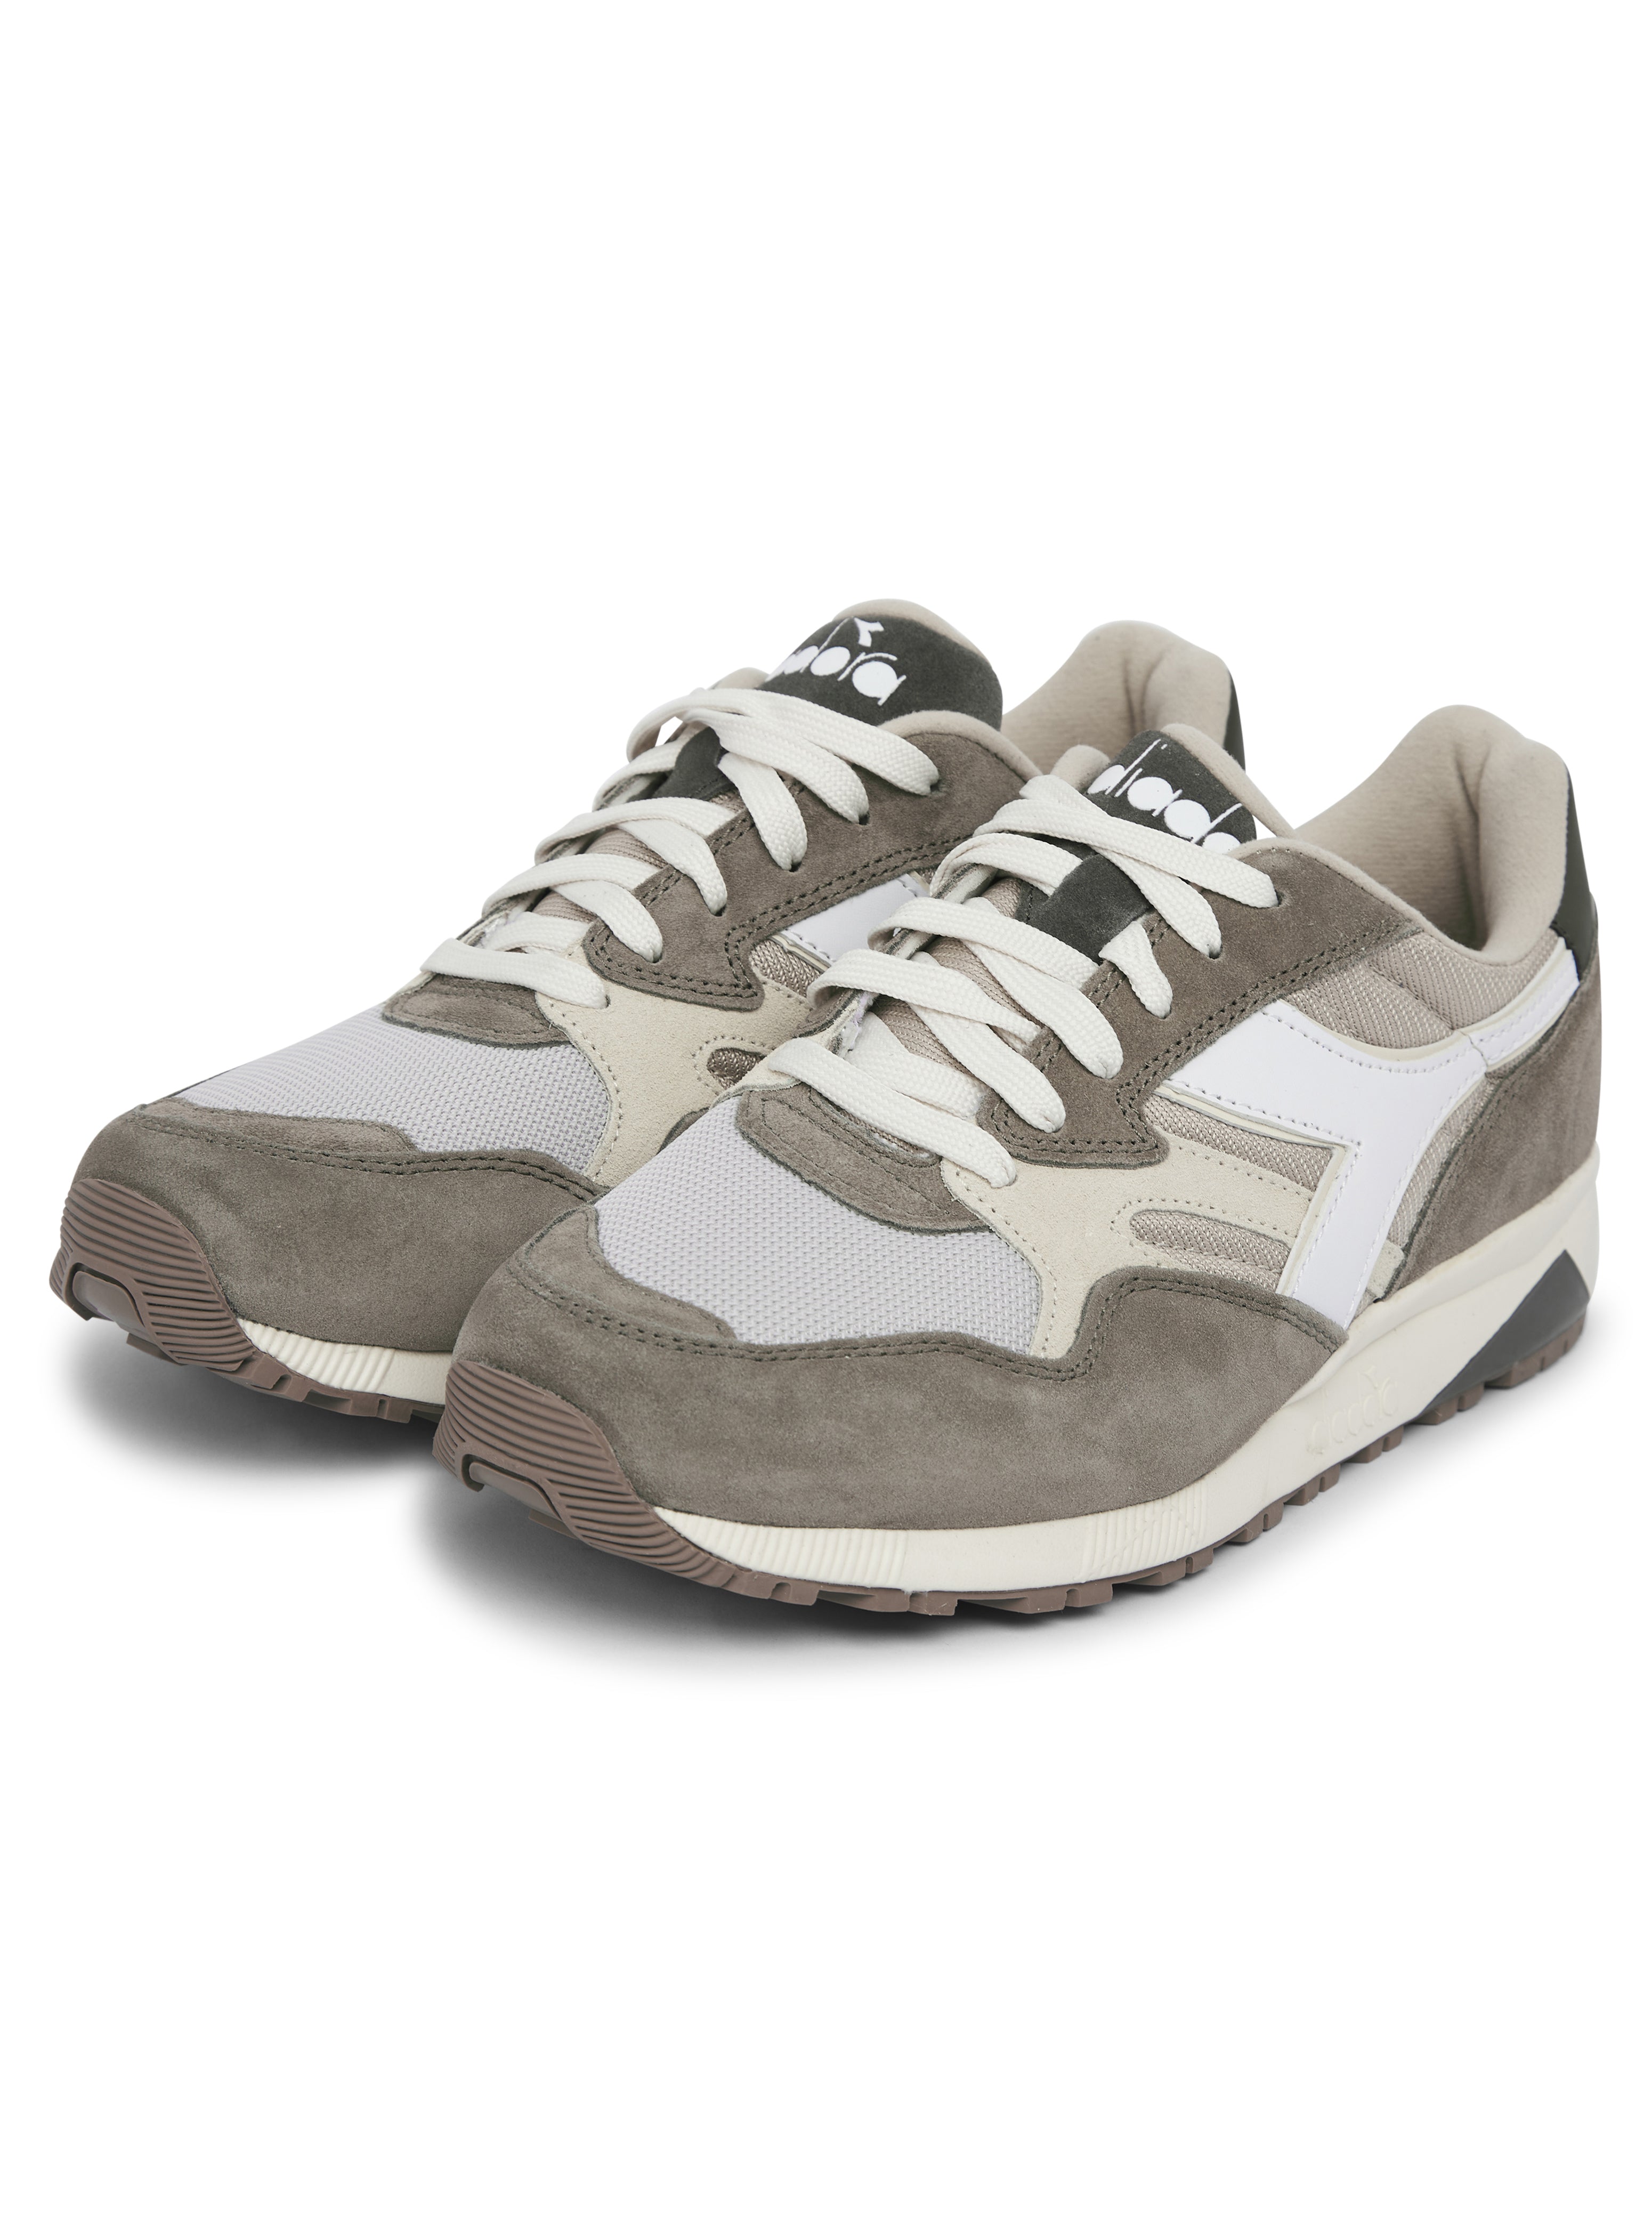 Load image into Gallery viewer, Diadora N902 Trainer Tan
